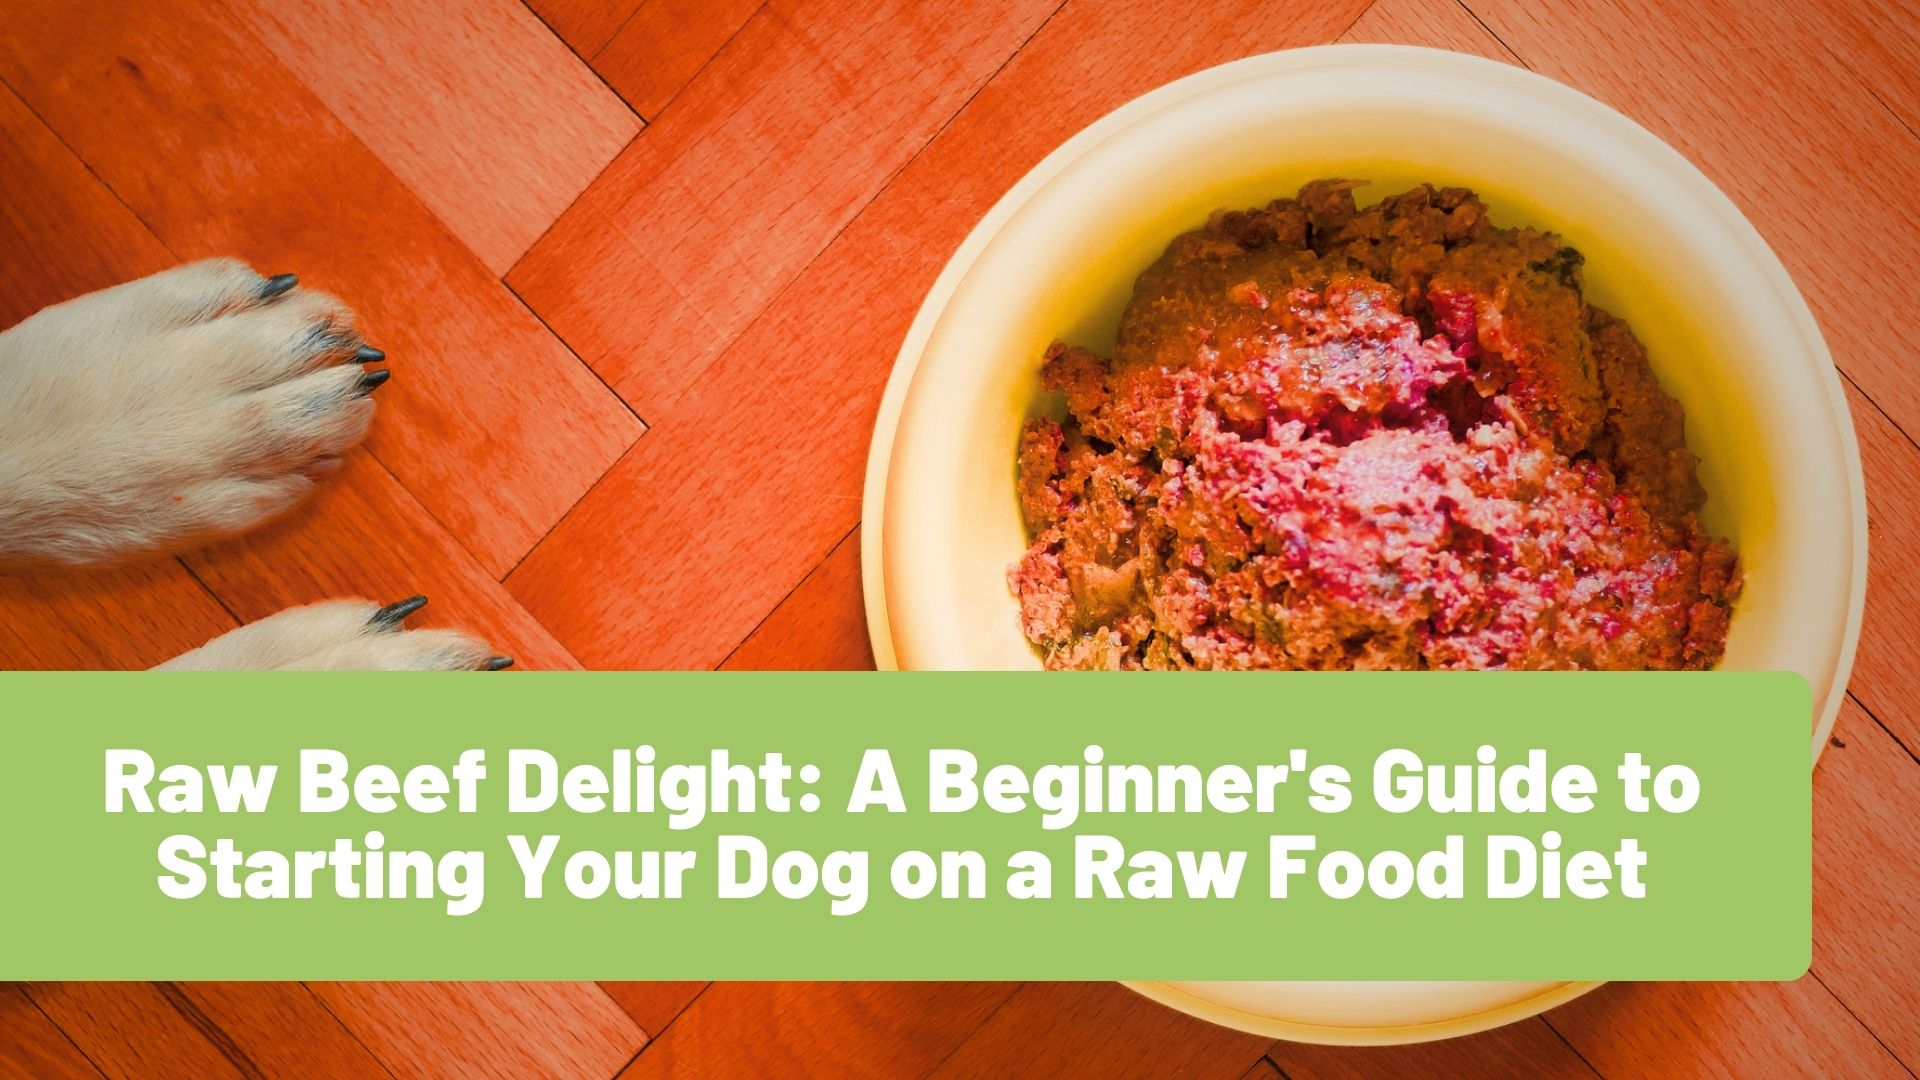 Raw Beef Delight: A Beginner's Guide to Starting Your Dog on a Raw Food Diet - RawOrigins.pet - The Raw Dog Food Company